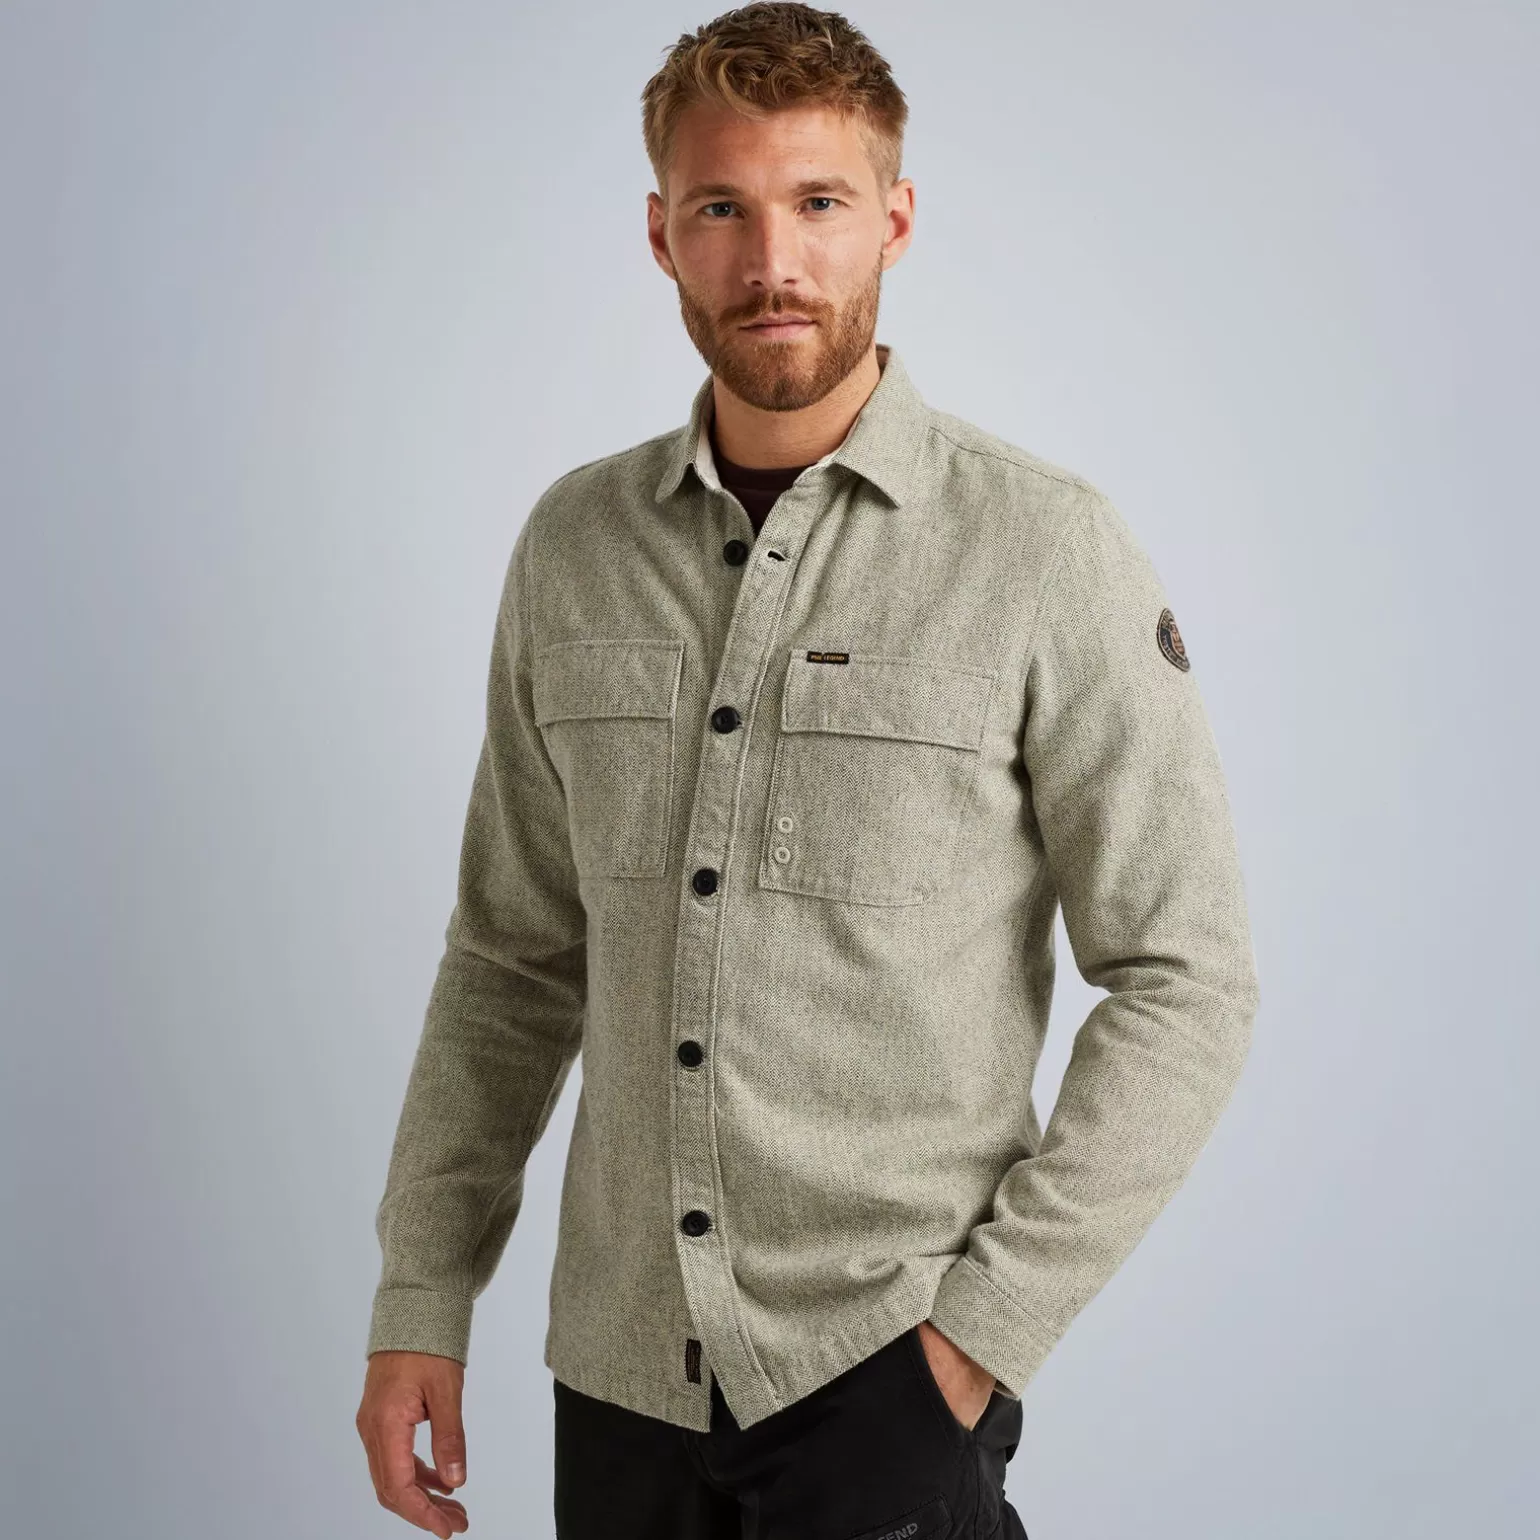 Tops*PME Legend Tops Shirt Jacket In Cotton